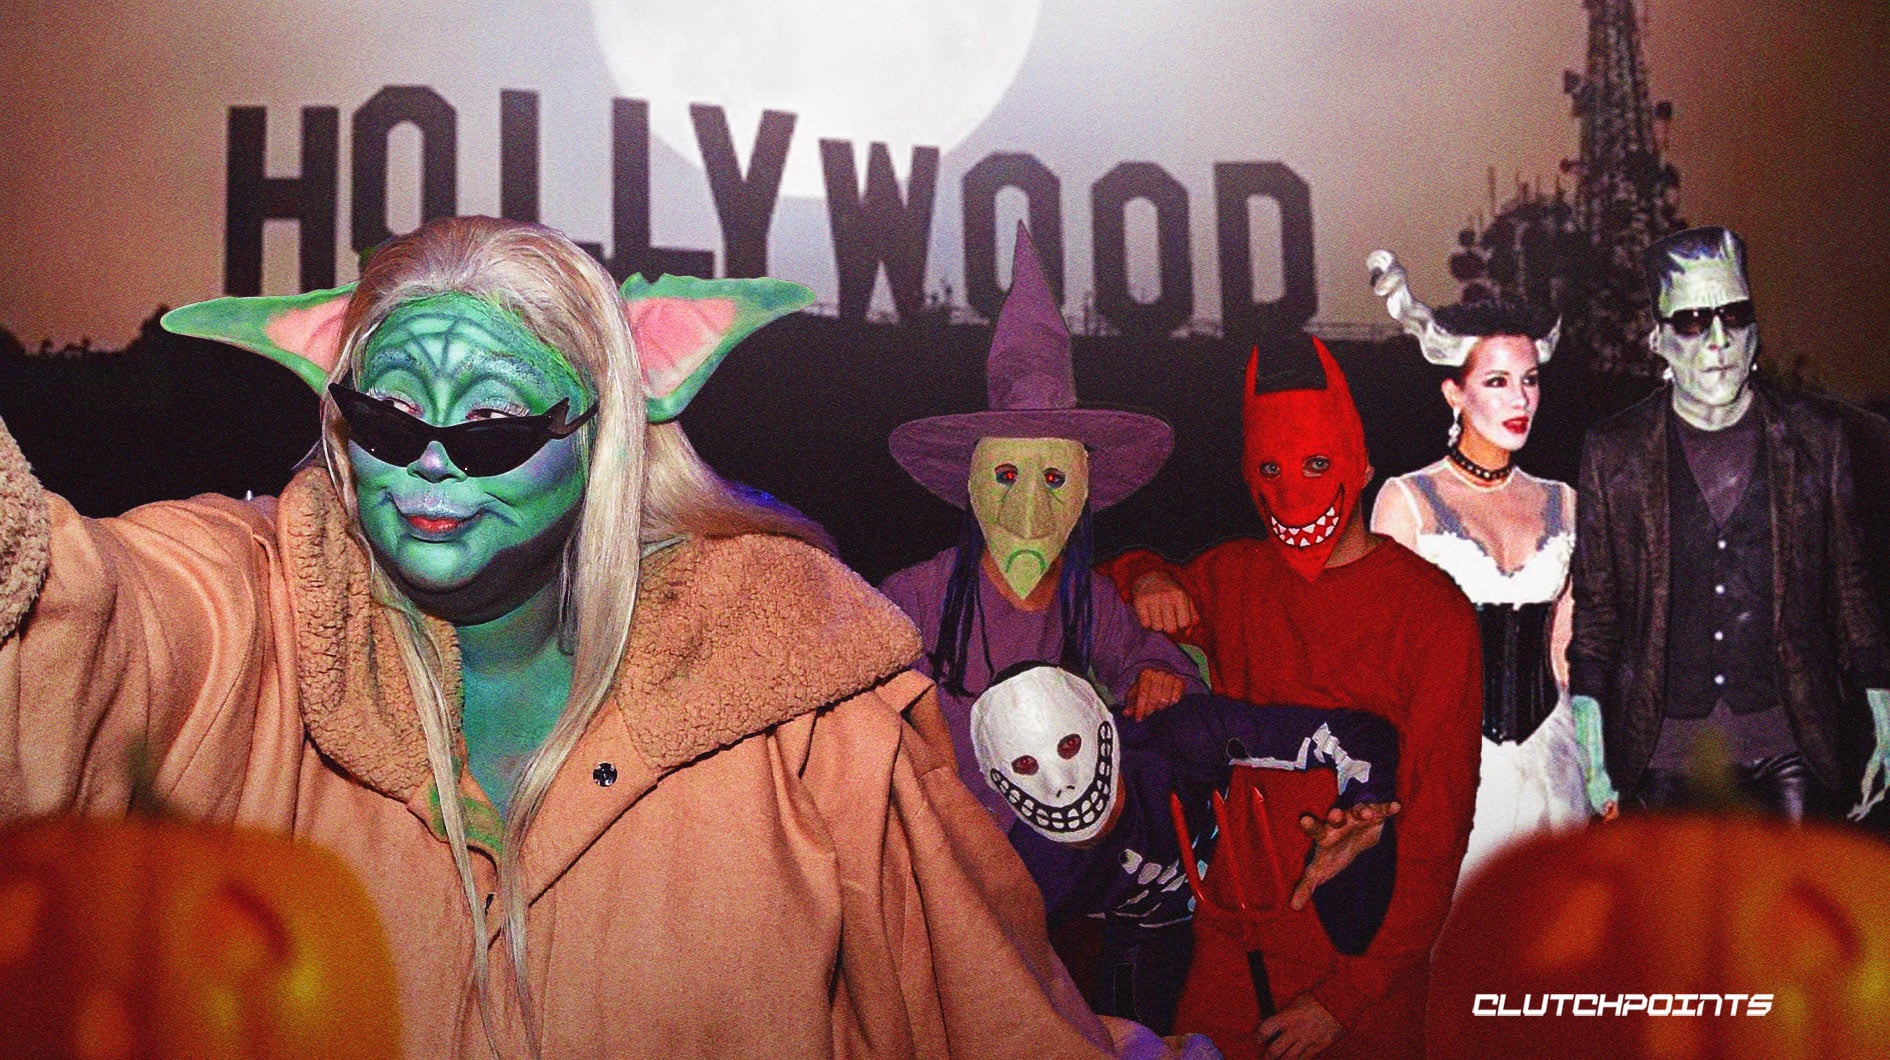 The best celebrity Halloween costumes, ranked